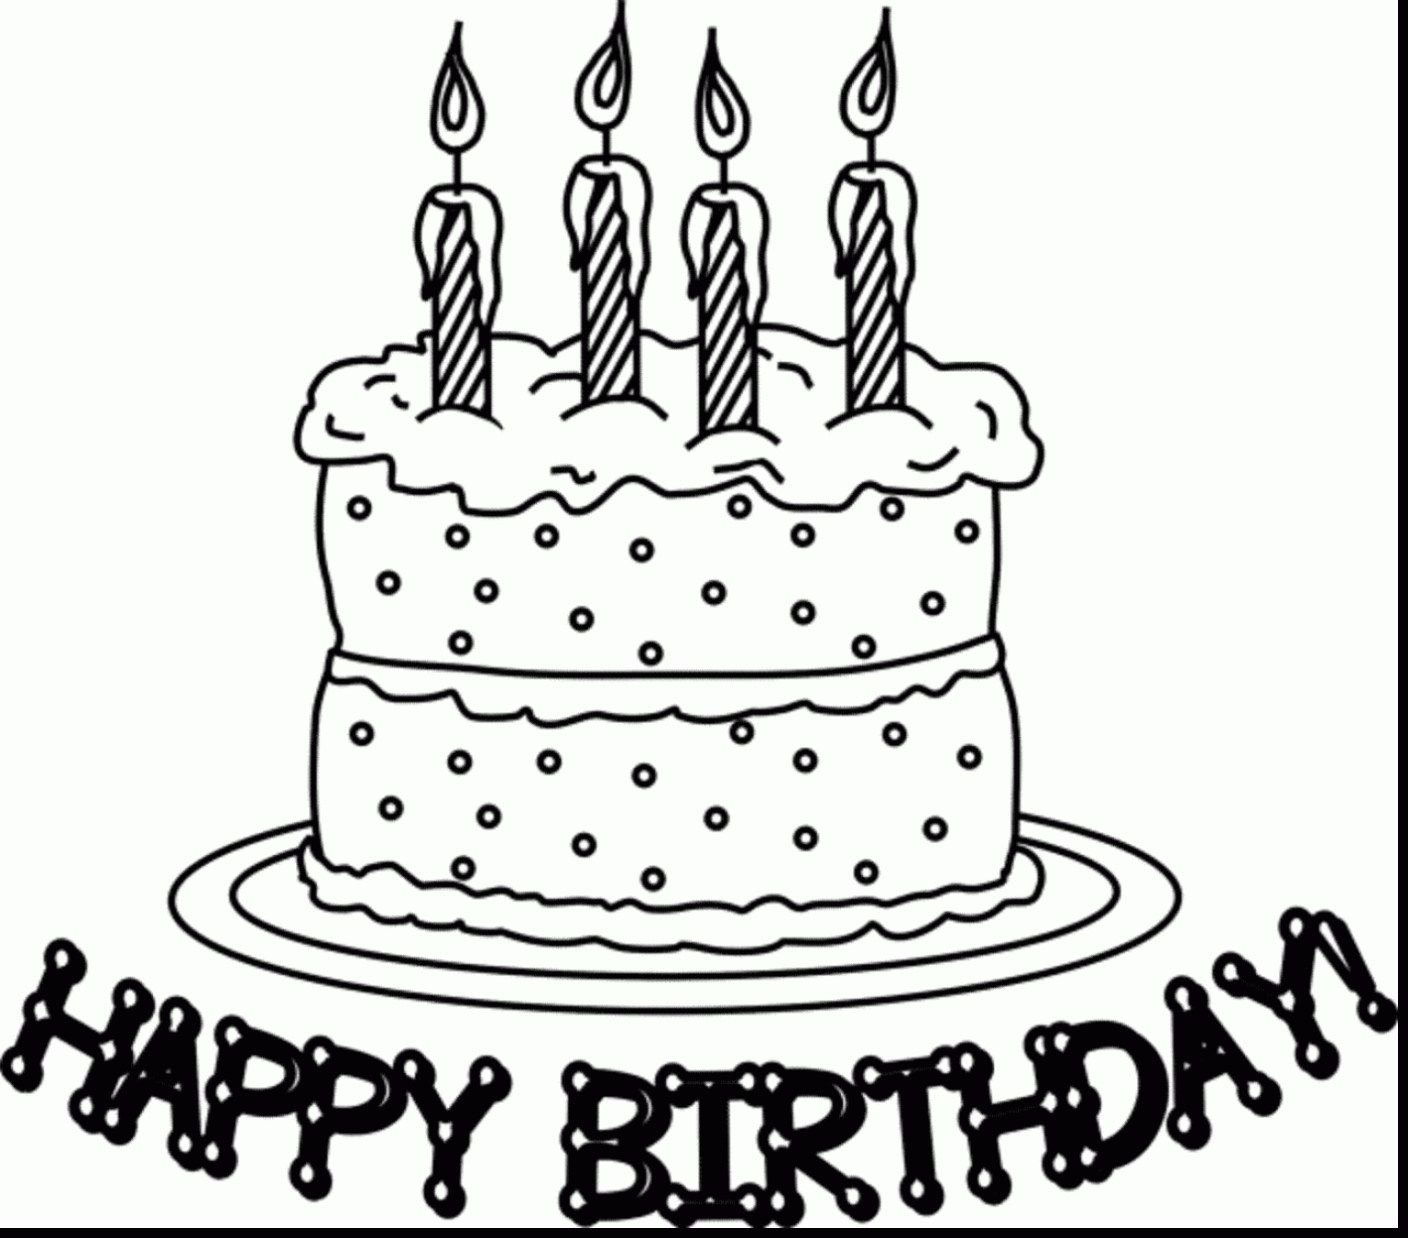 Cake Clipart Black And White Happy Birthday and other clipart images on ...